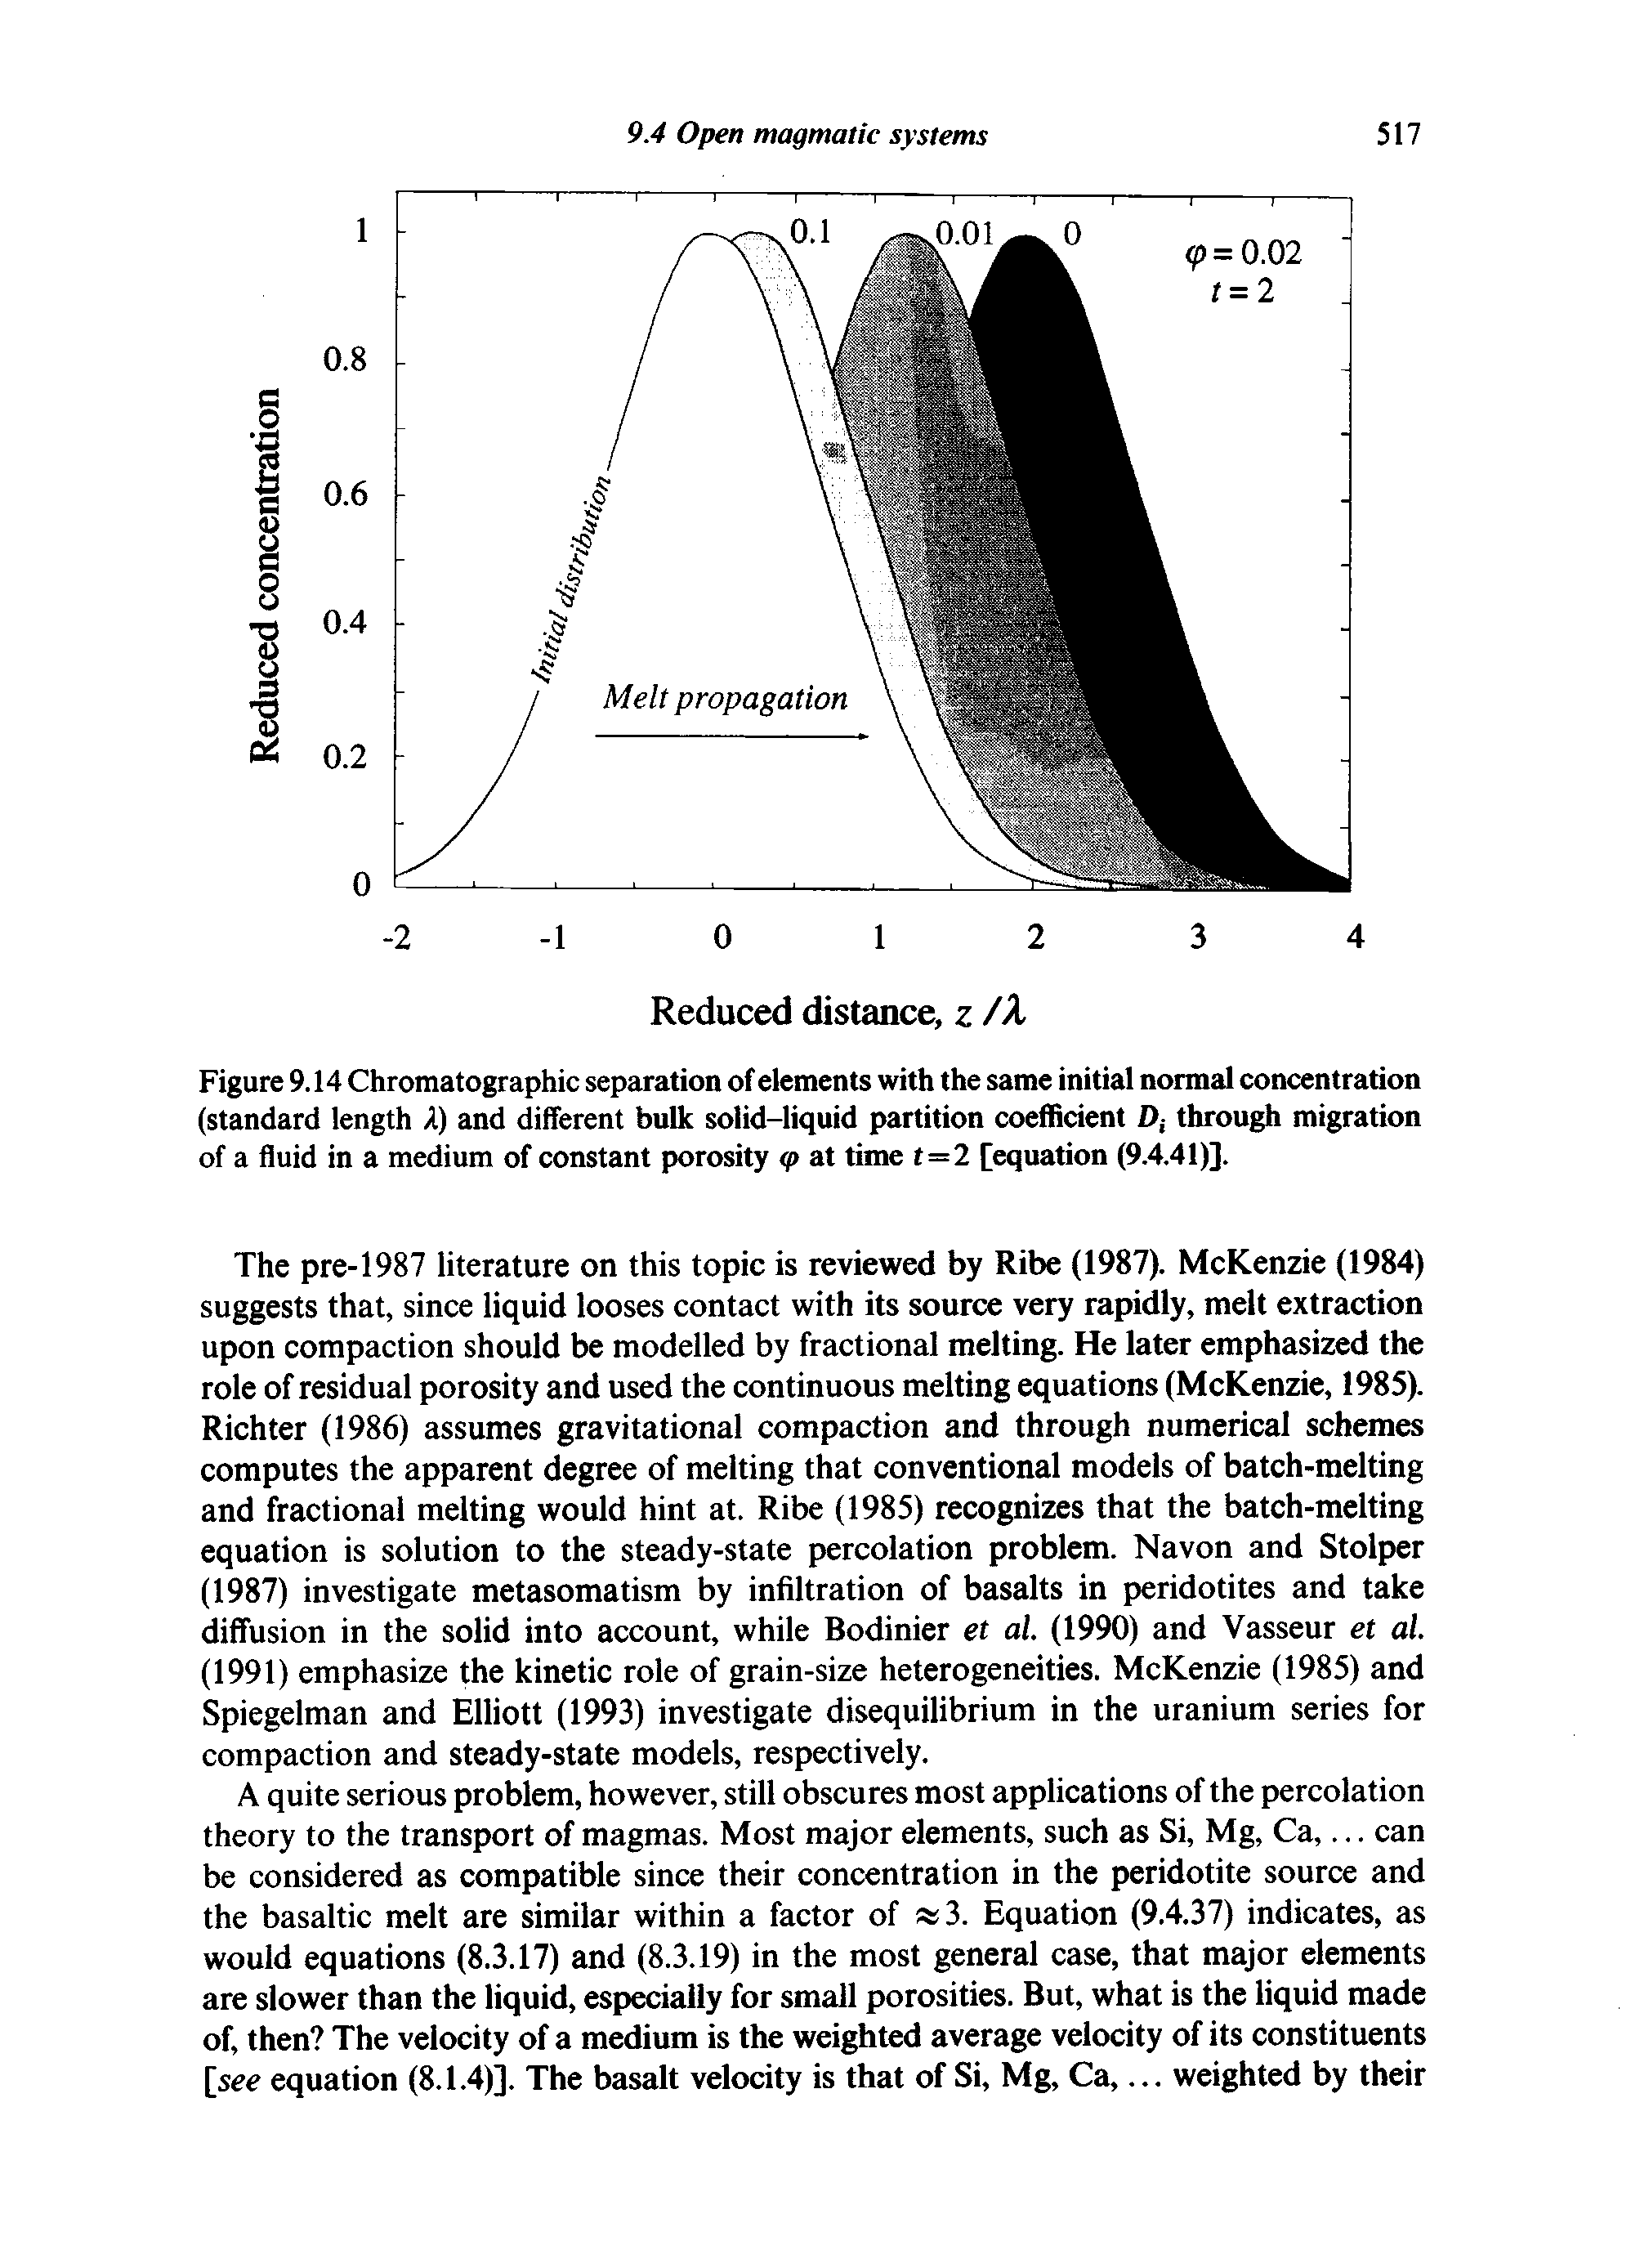 Figure 9.14 Chromatographic separation of elements with the same initial normal concentration (standard length A) and different bulk solid-liquid partition coefficient >, through migration of a fluid in a medium of constant porosity q> at time t=2 [equation (9.4.41)].